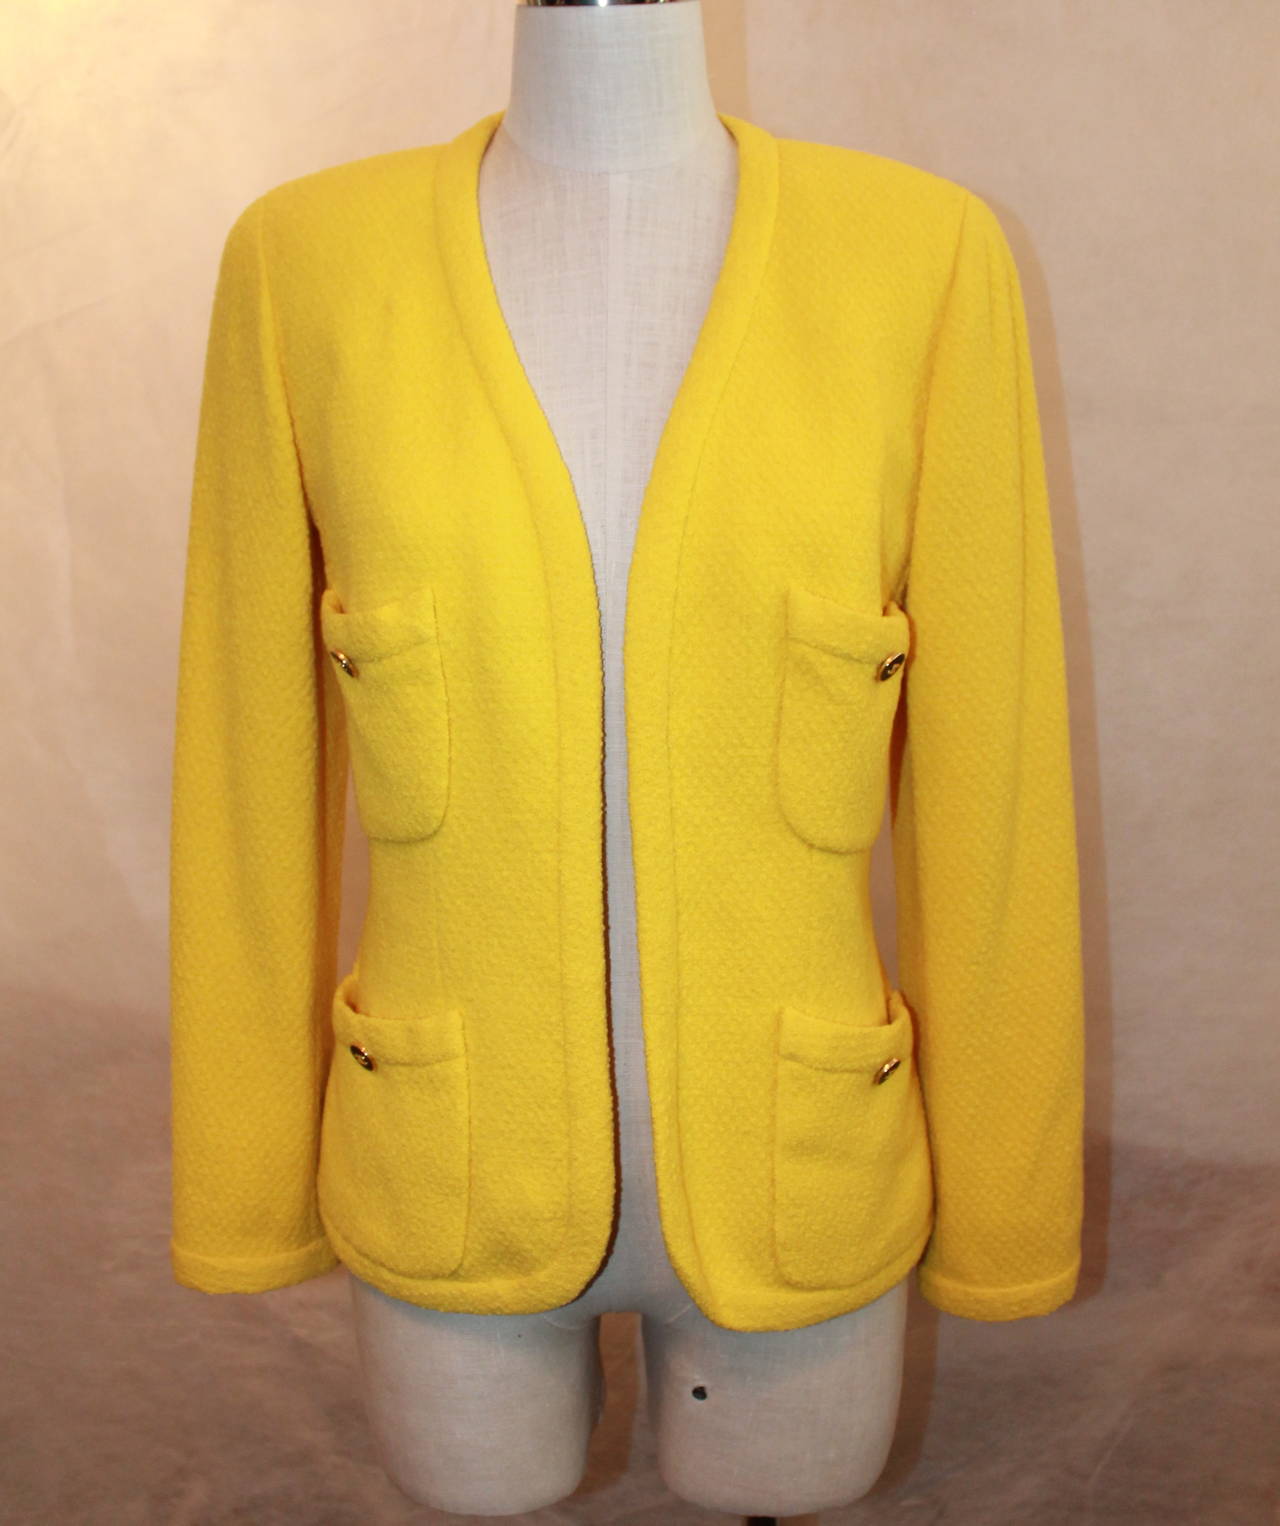 Chanel 1980's Vintage Yellow Tweed 4-Pocket Jacket - 38. This jacket is in very good condition and is 100% wool with a 100% silk lining. It has a button on each of the 4 pockets and no closure. 
**There is a matching skirt in